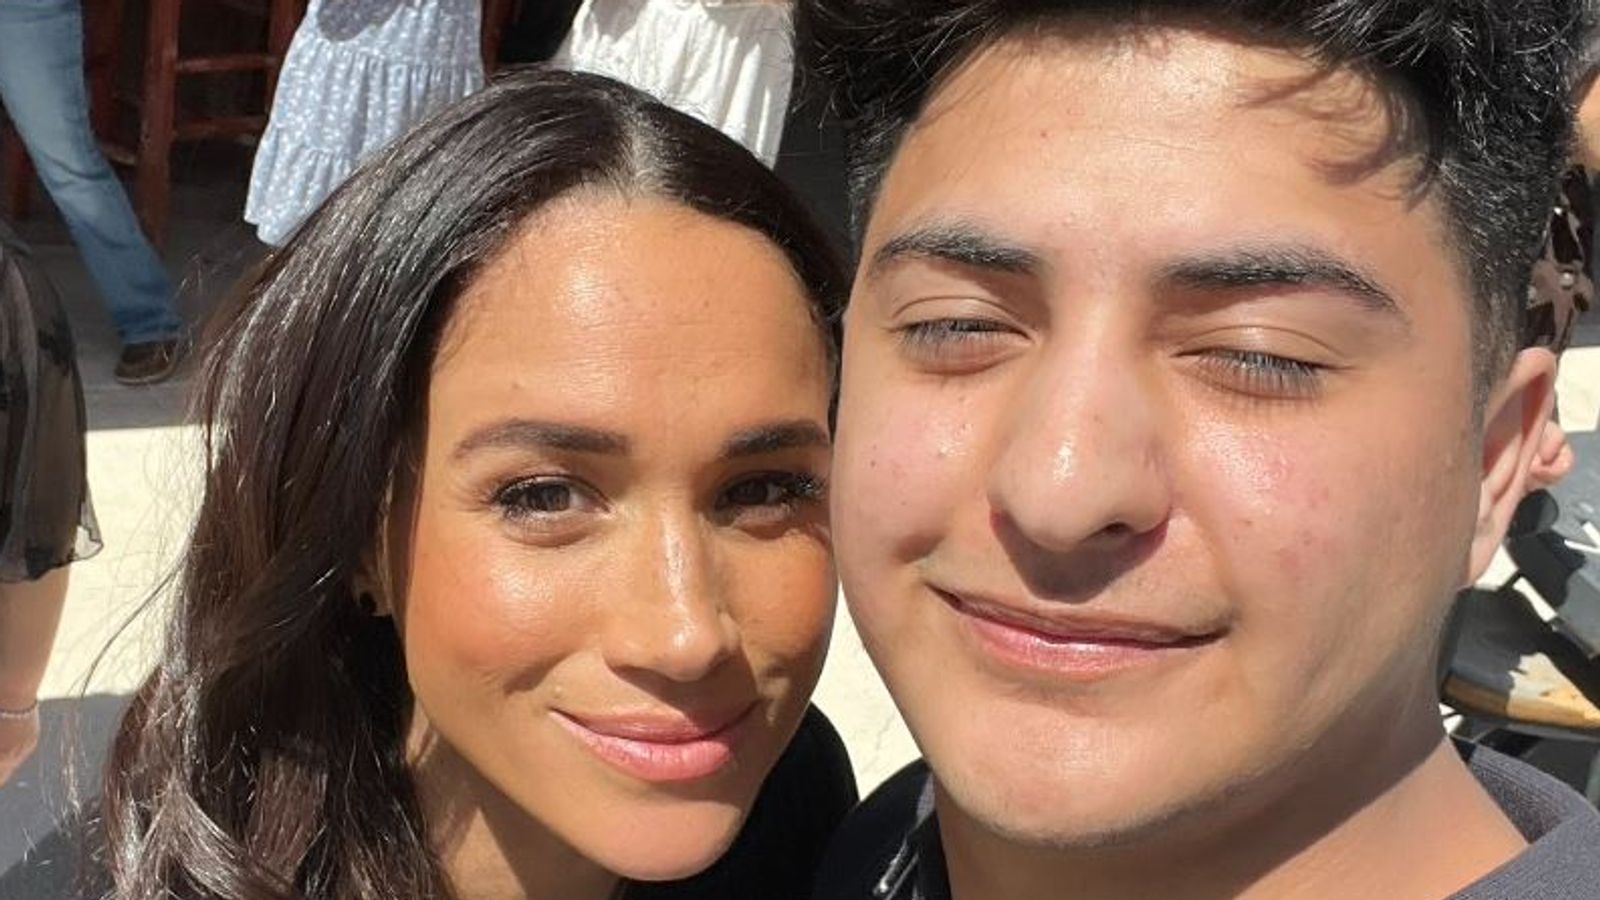 Harry and Meghan surprise family of Texas school shooting victim with 'lots of tears of joy'